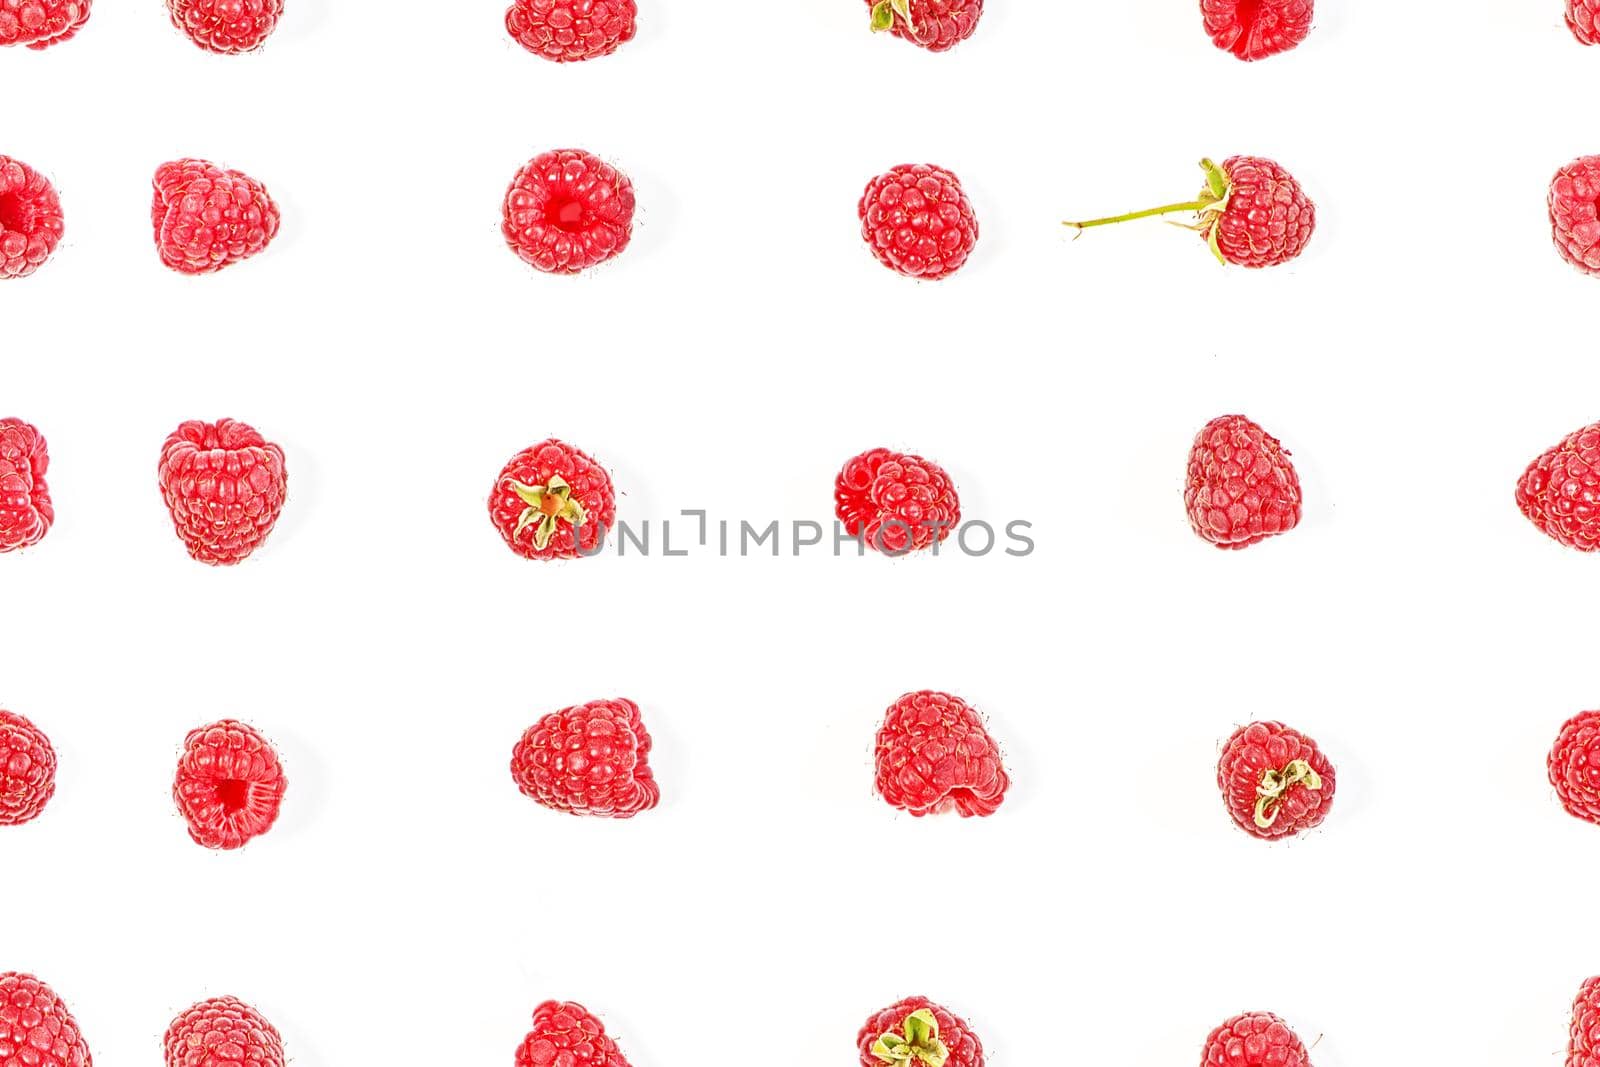 Pattern of raspberries spread out in lines on a white background in various poses by vizland